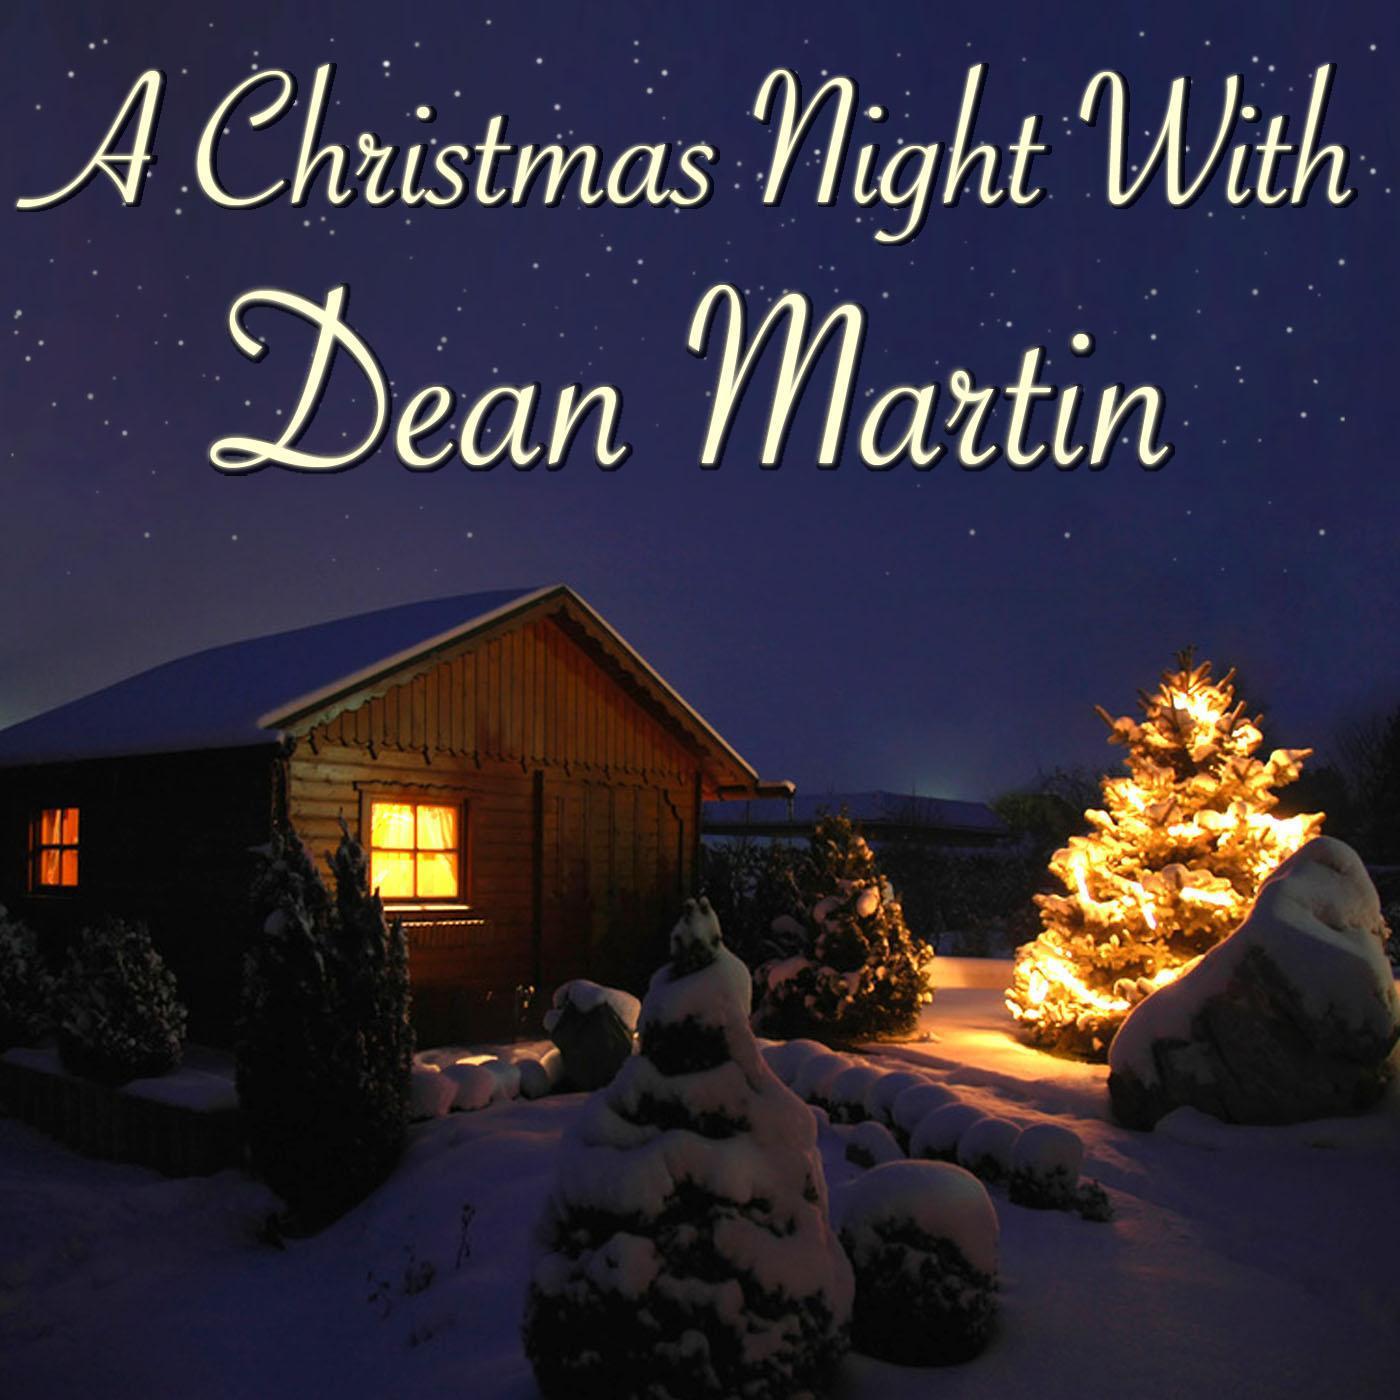 Christmas With Dean Martin